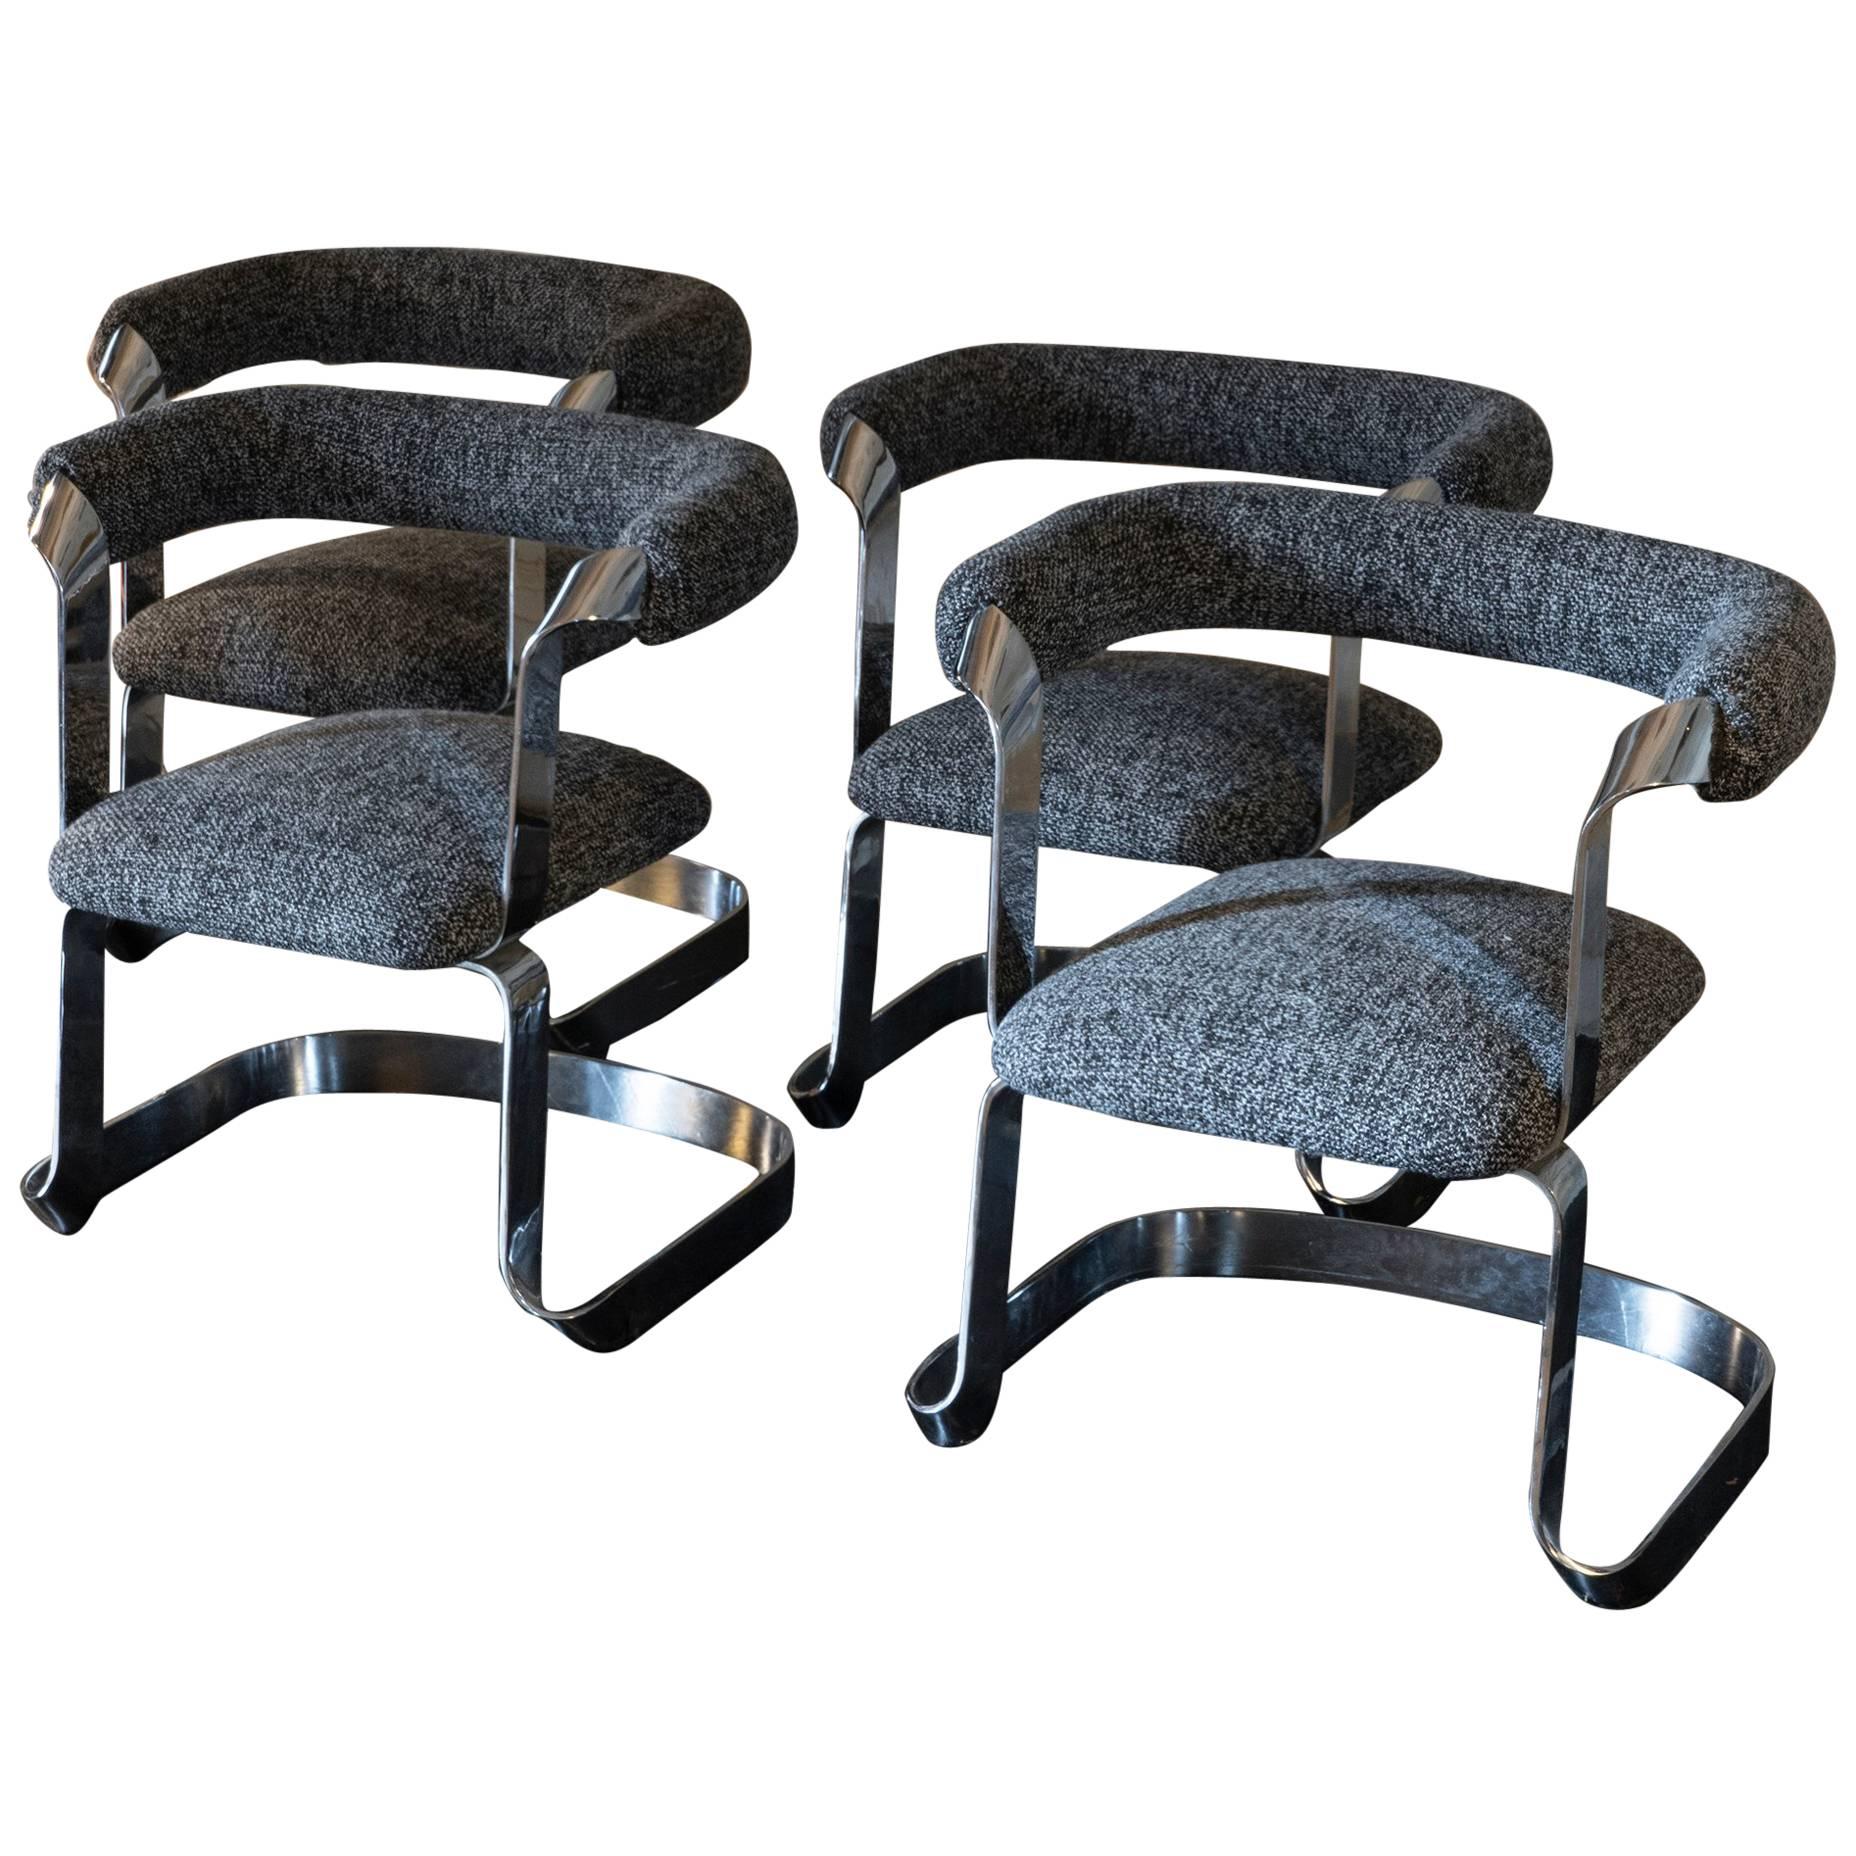 Set of TwoChromed Dining Chairs, Black/White/Grey Woven Fabric, Italy, 1970s For Sale